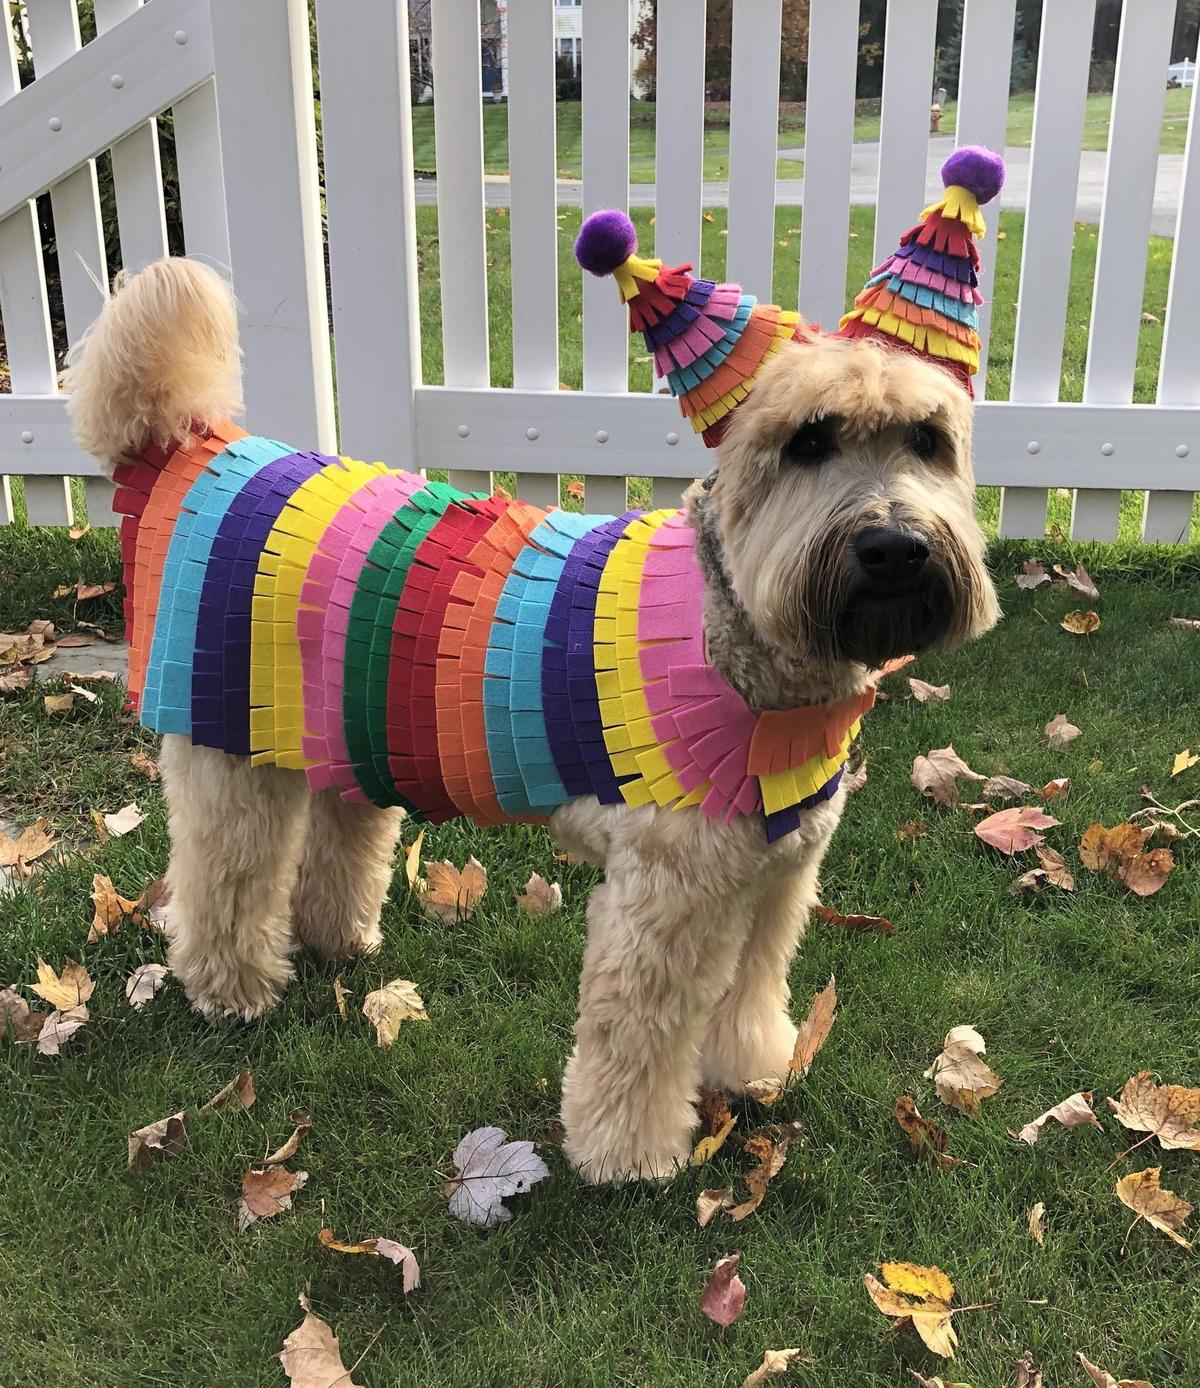 The Best Halloween Dog Costumes for 2021 - BringFido